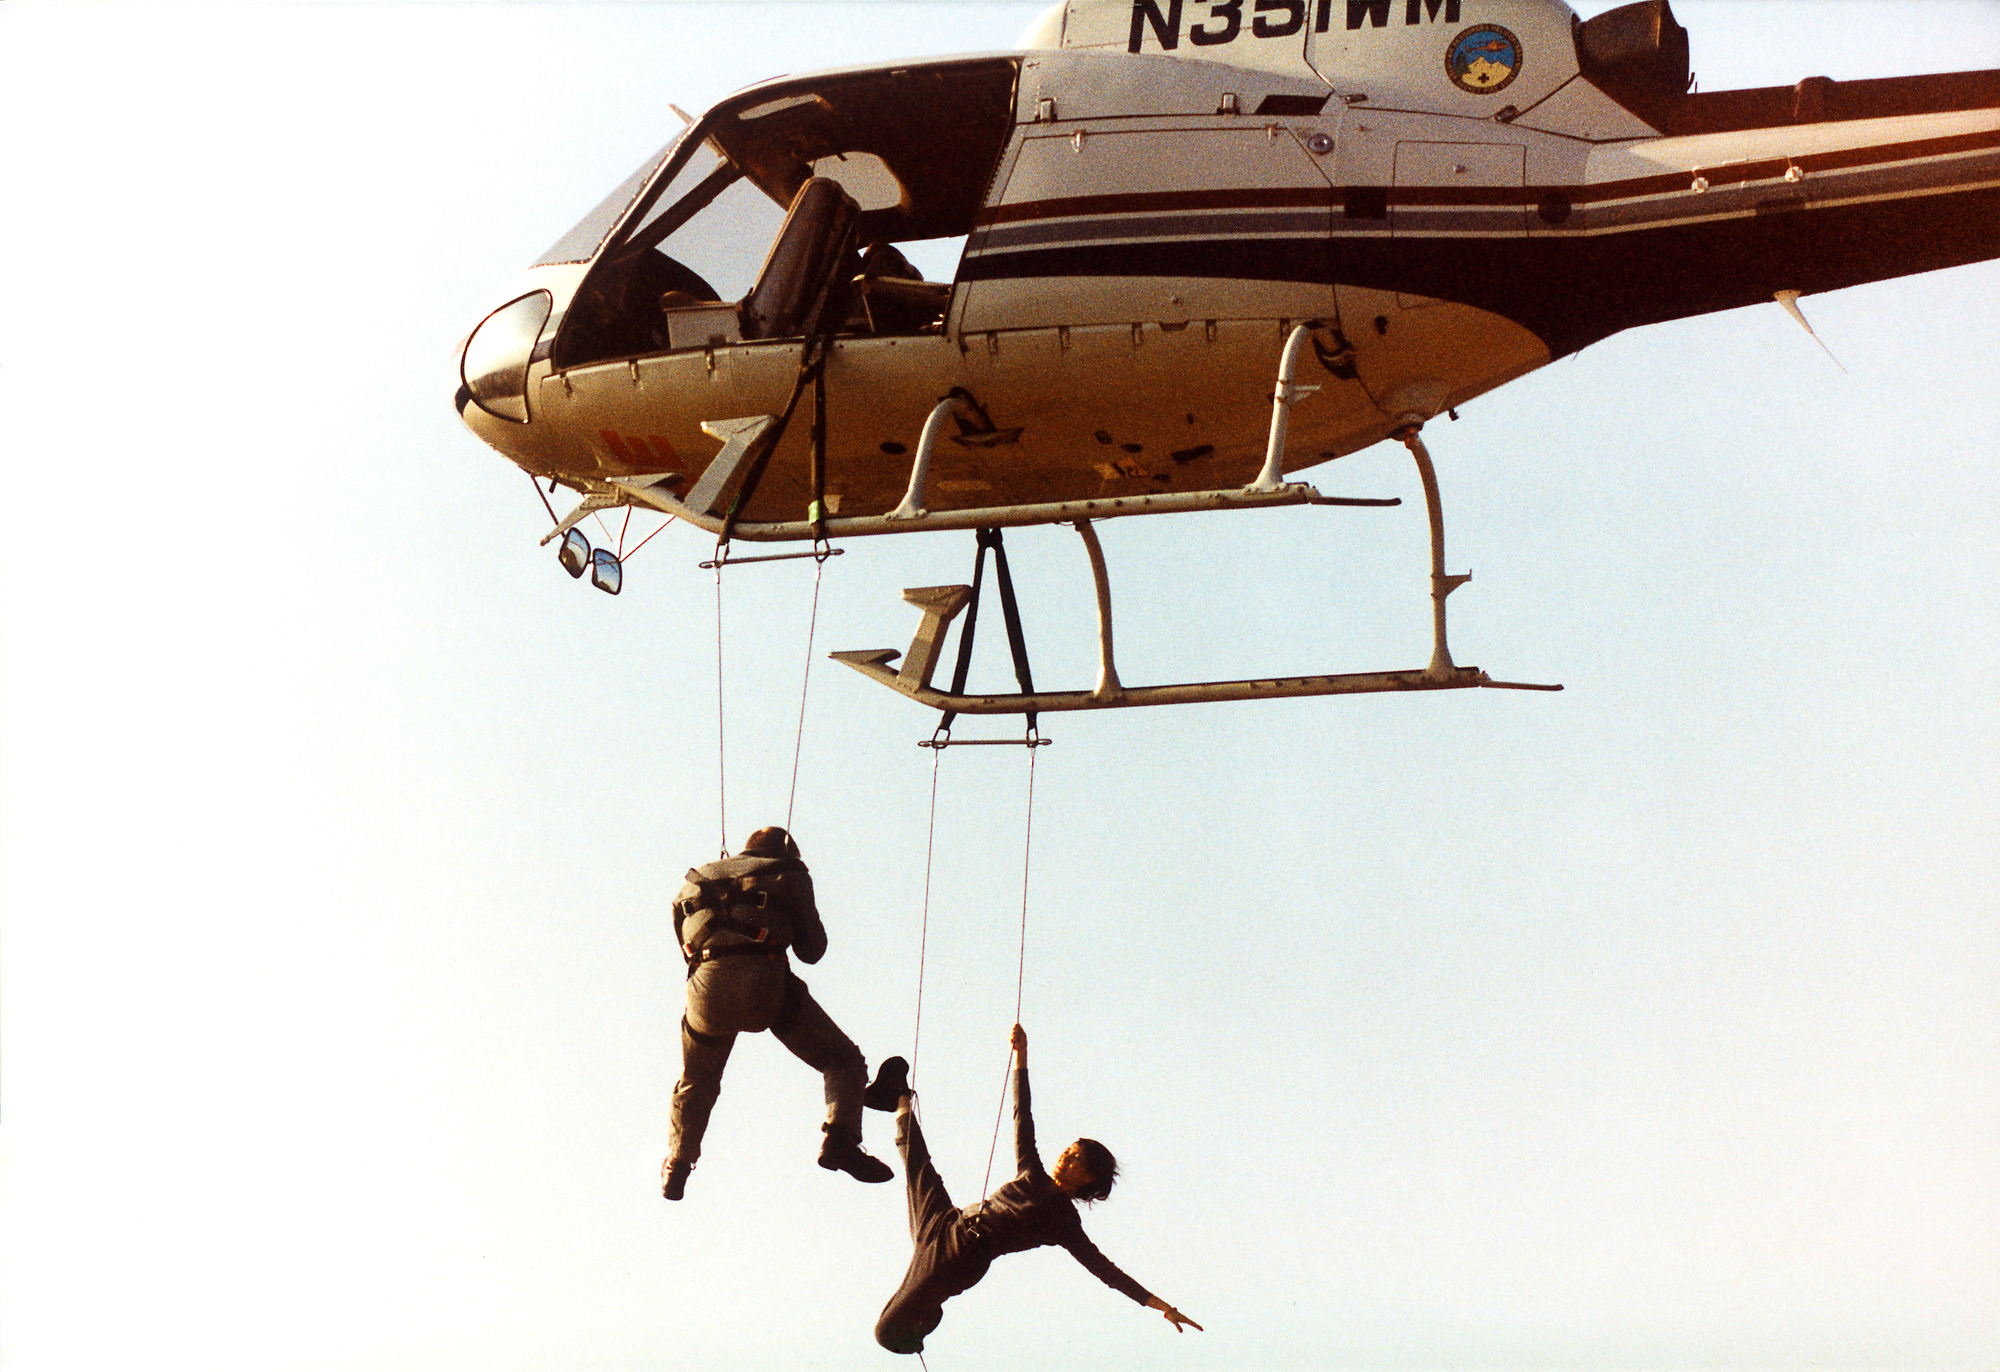 Michelle Yeoh dangling from a helicopter during photo shoot with world-famous photographer Joe McNally for National Geographic magazine.